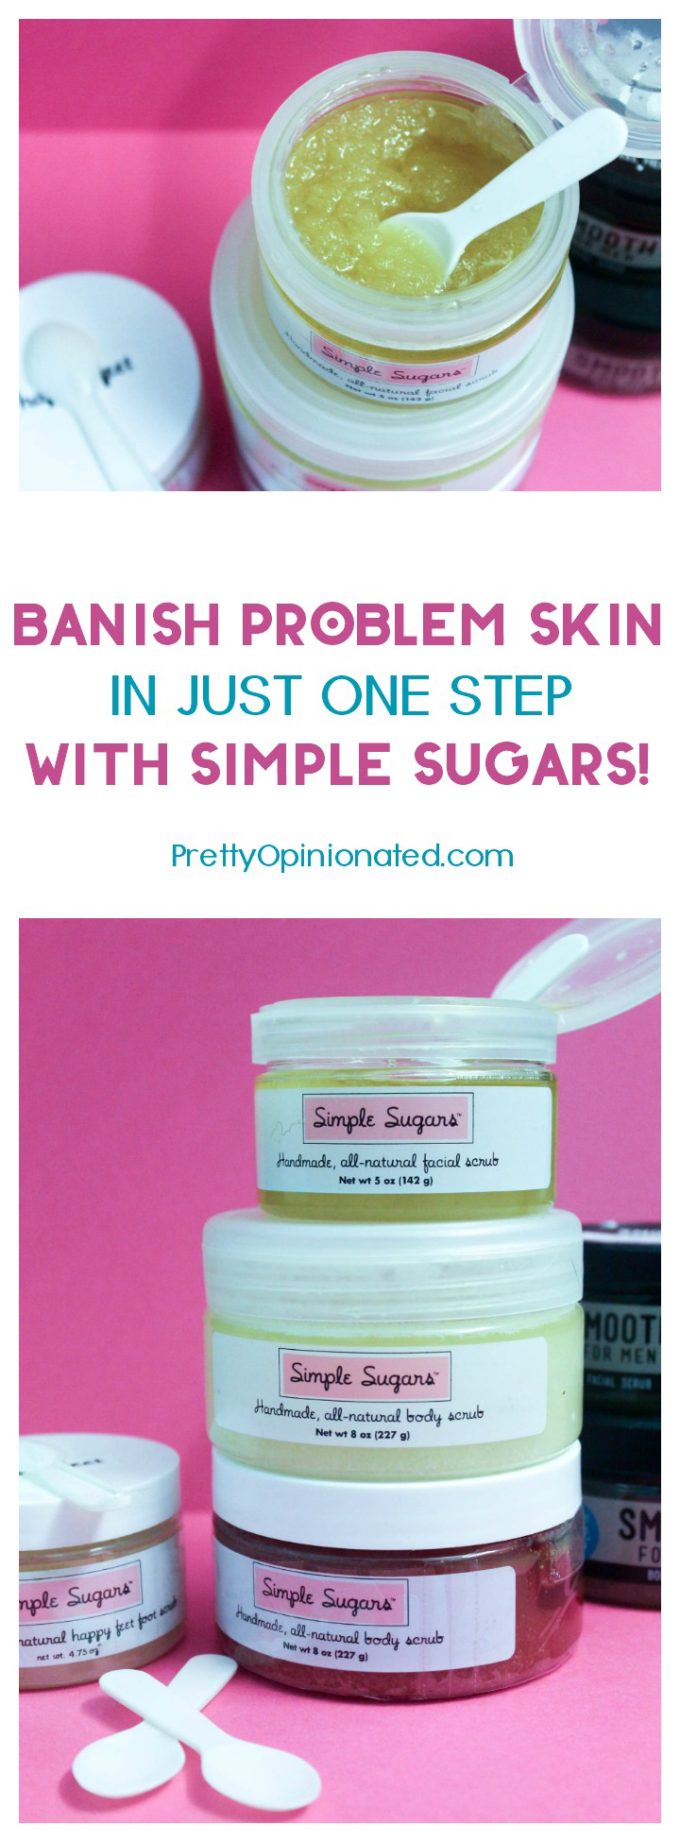 Banish Problem Skin In Just One Step with Simple Sugars #GoNoLo